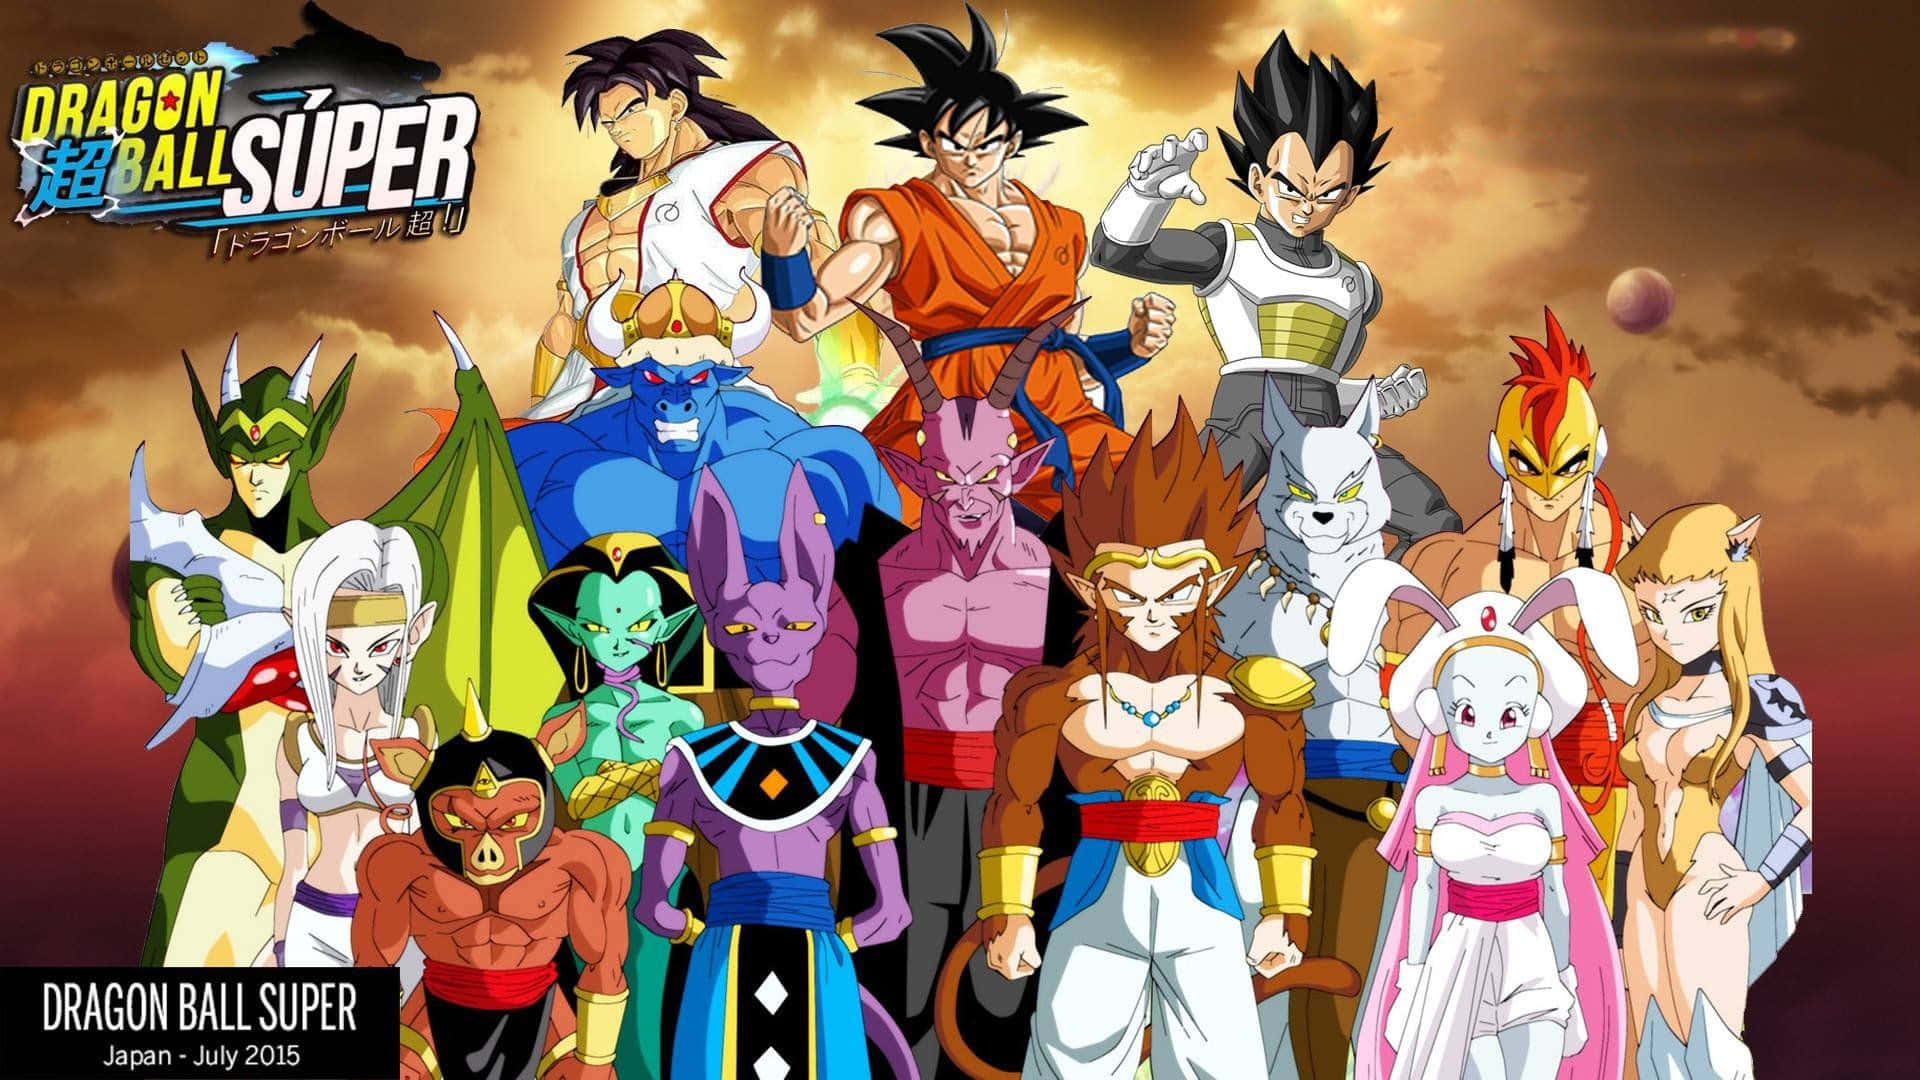 Transform into a Super Saiyan and tap into your ultimate power with Super Dragon Ball Wallpaper